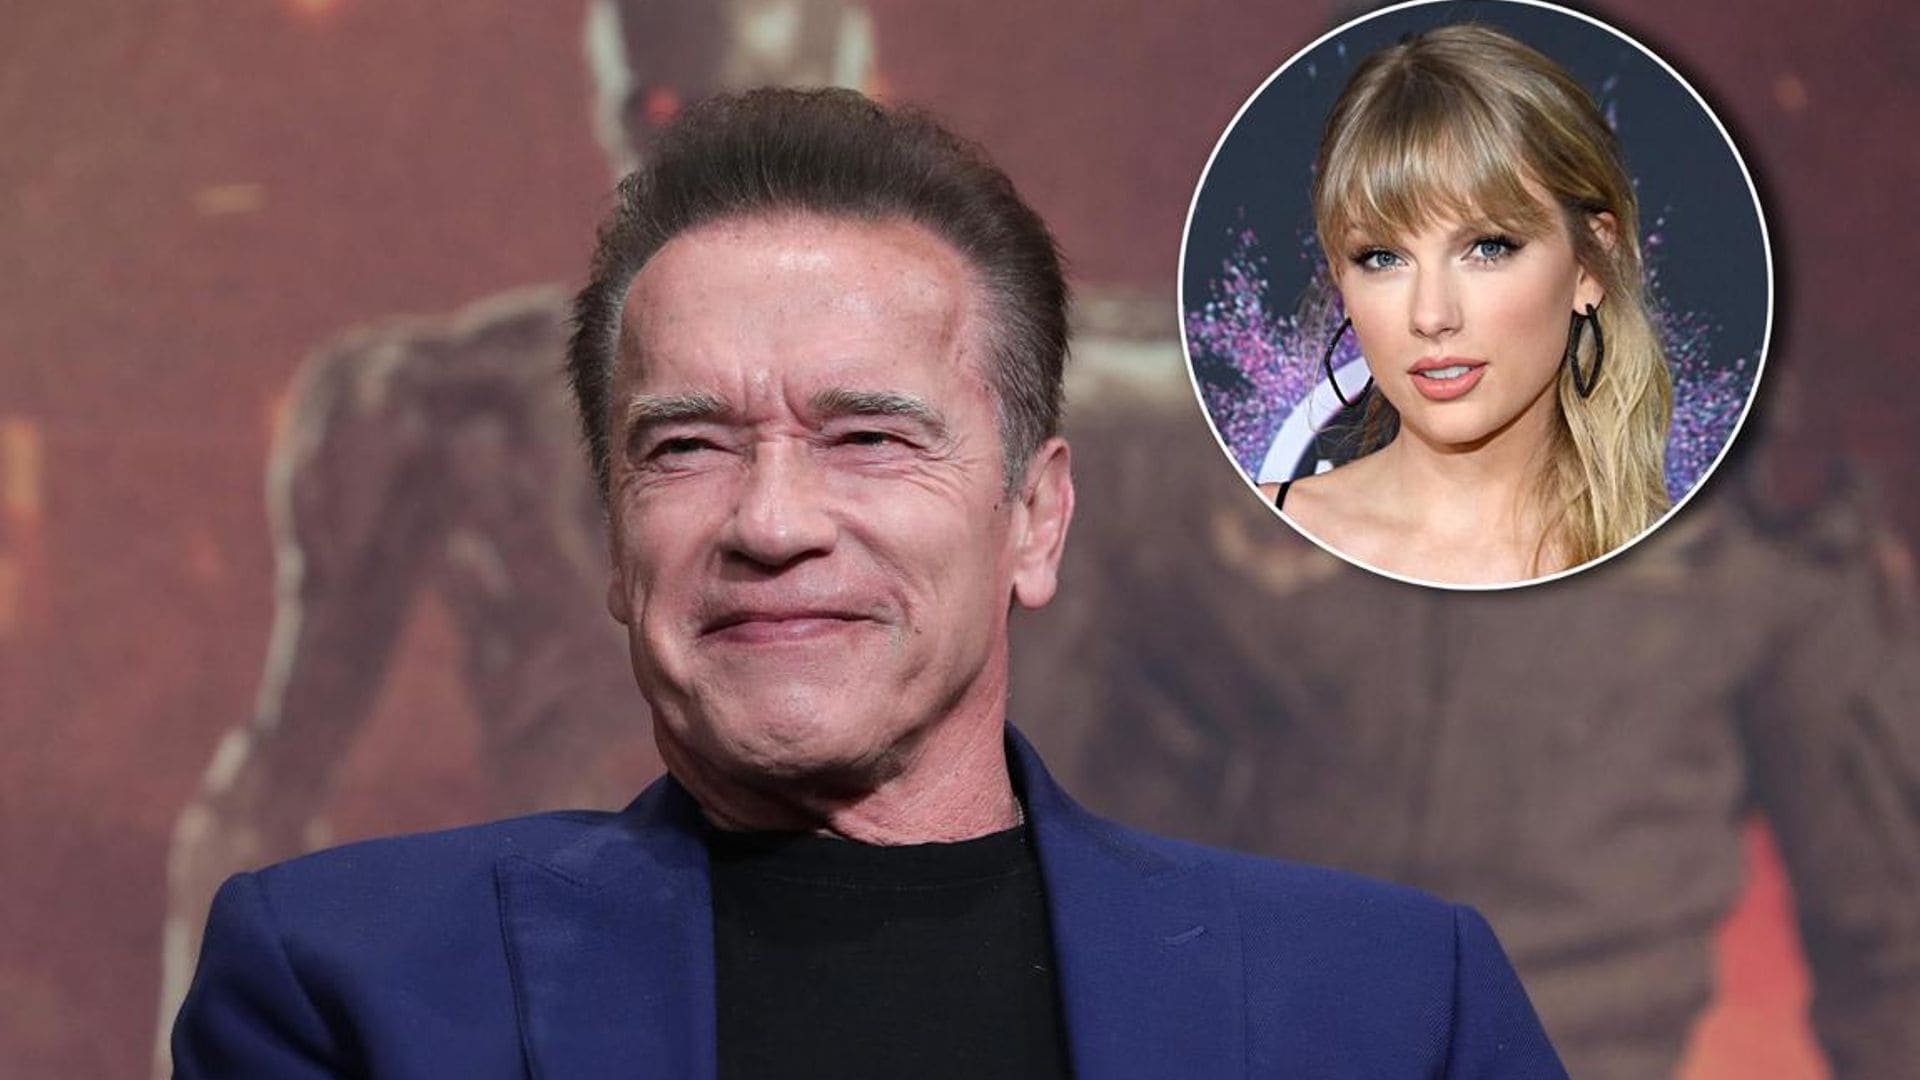 Watch Arnold Schwarzenegger work out to Taylor Swift music